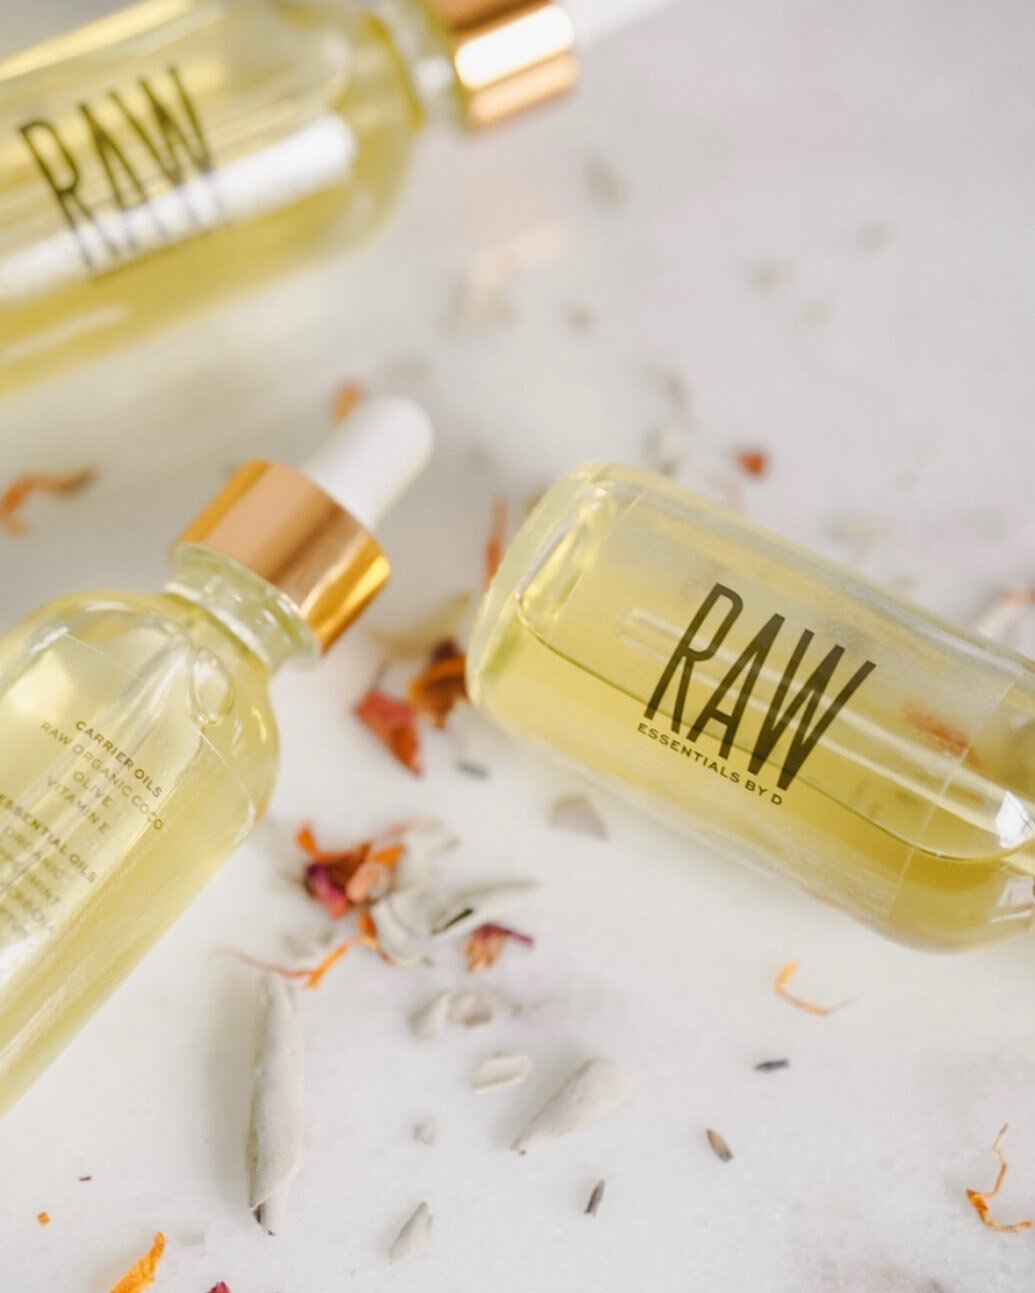 It&rsquo;s fri-YAY, my loves!! Let&rsquo;s talk bath and body oils for a sec, shall we?

My absolute favorite thing to do to unwind is hide inside a hot steamy shower or soak in a bubble bath. And the best part? I add a few drops (or a lot 🙃) of my 